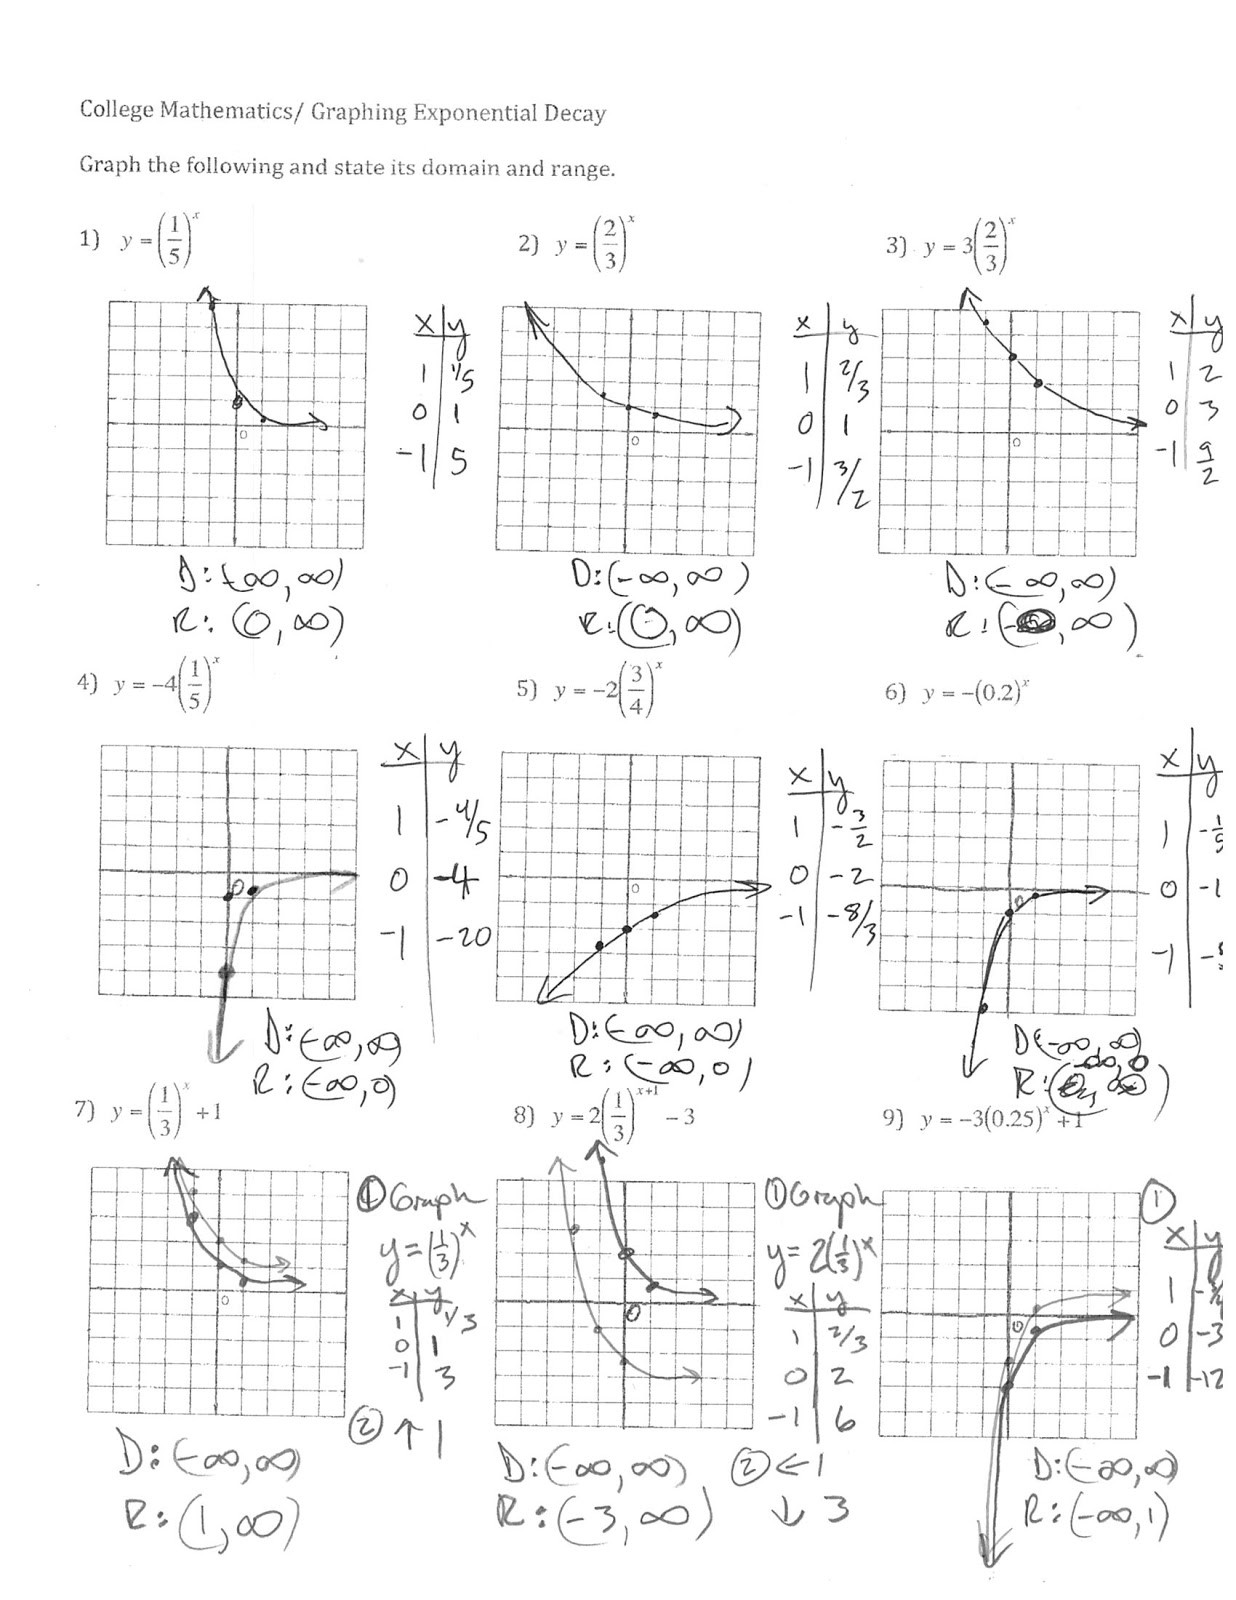 Growth and Decay Worksheet Mr Suominen S Math Homepage College Mathematics 2 18 13